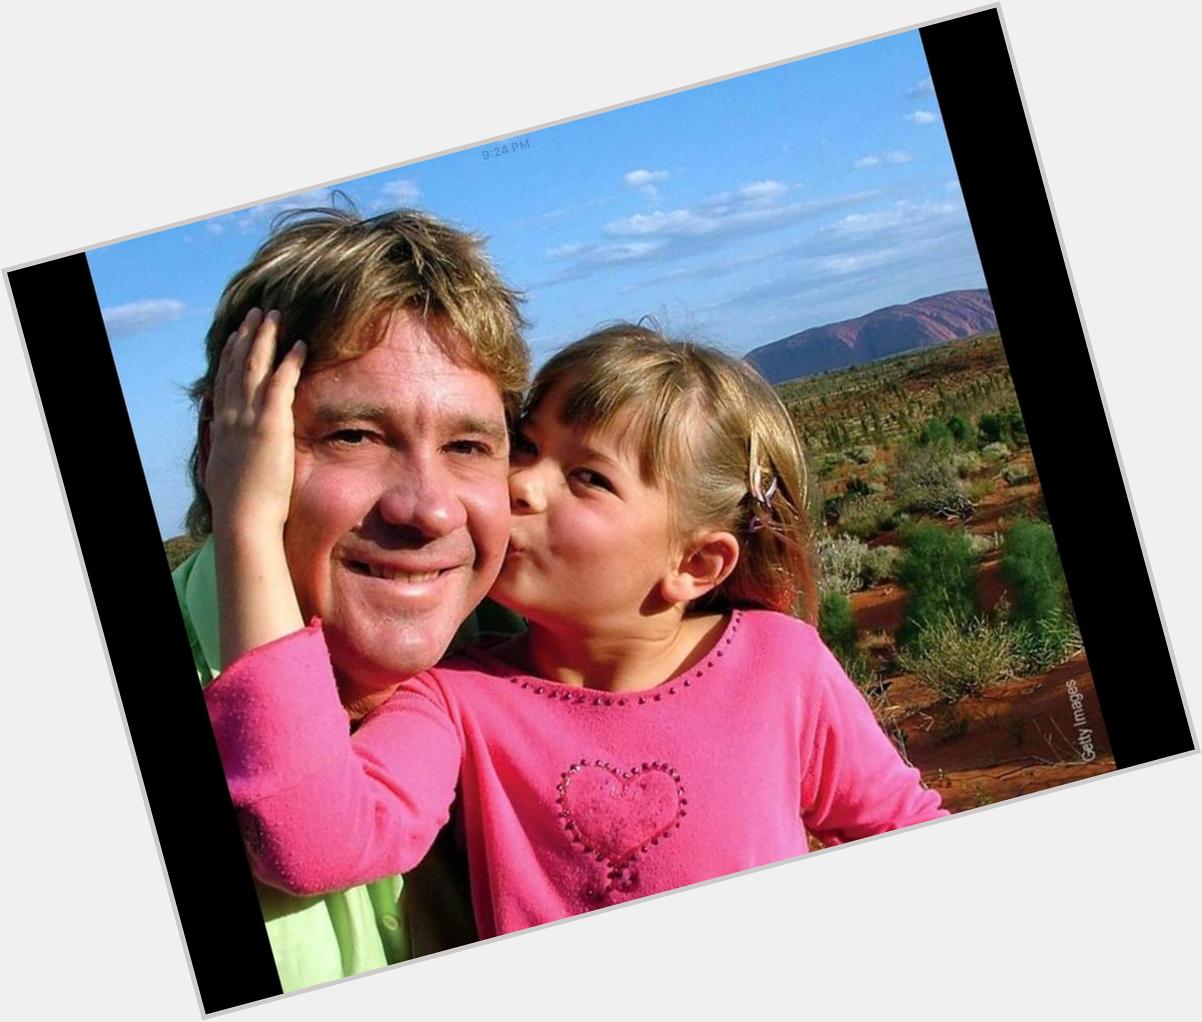 Steve Irwin would have been 56 today. Happy birthday mate 